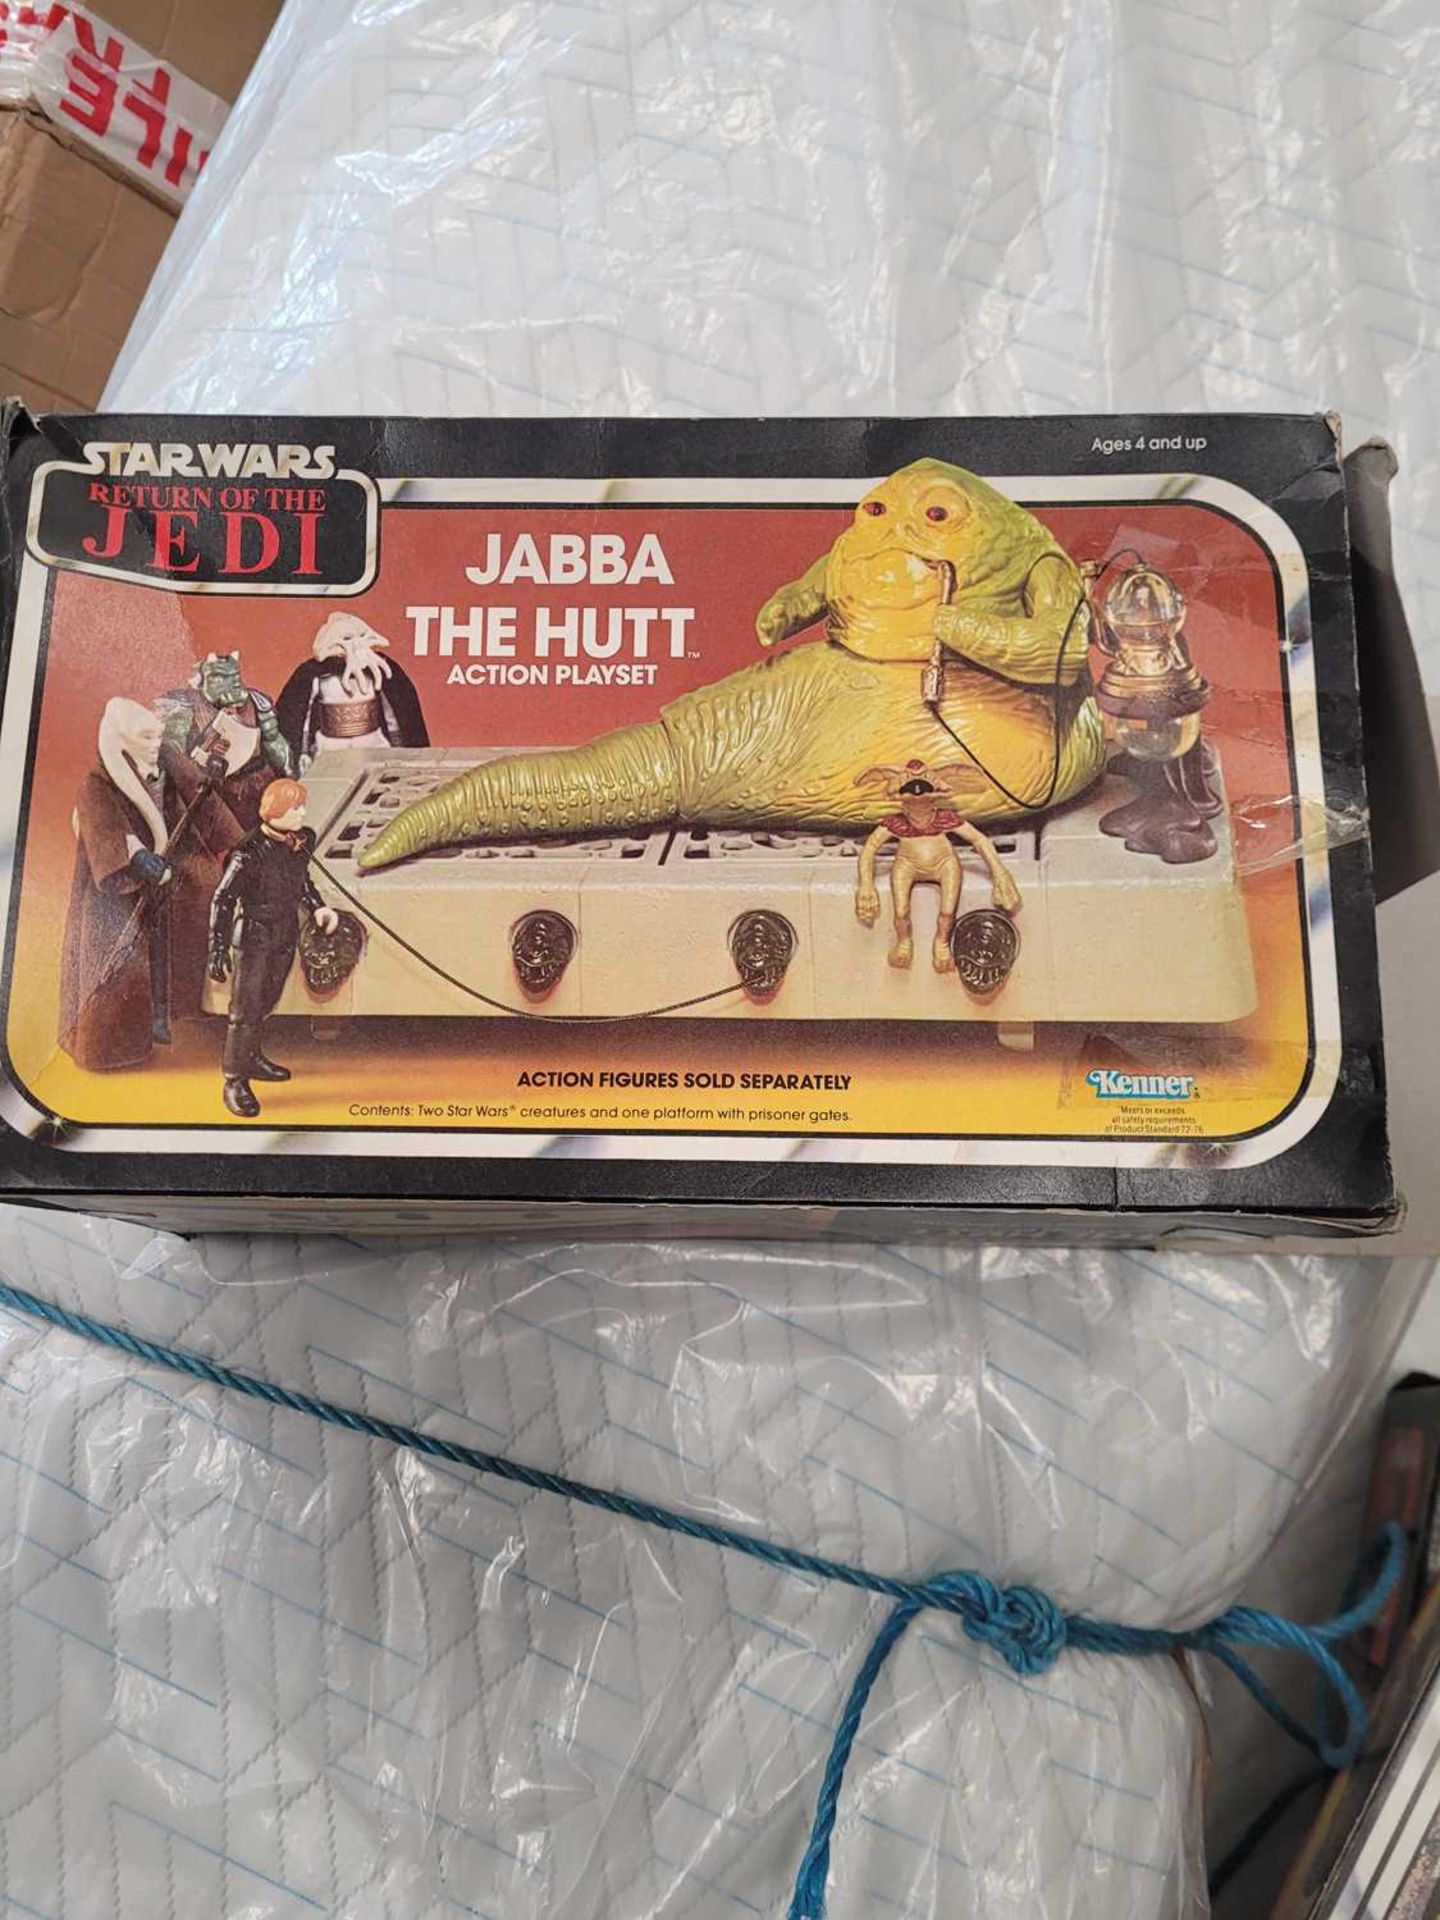 Cage of Palitoy Star Wars figures Boxes contain no inserts or instructions, inside boxes are what - Image 4 of 4